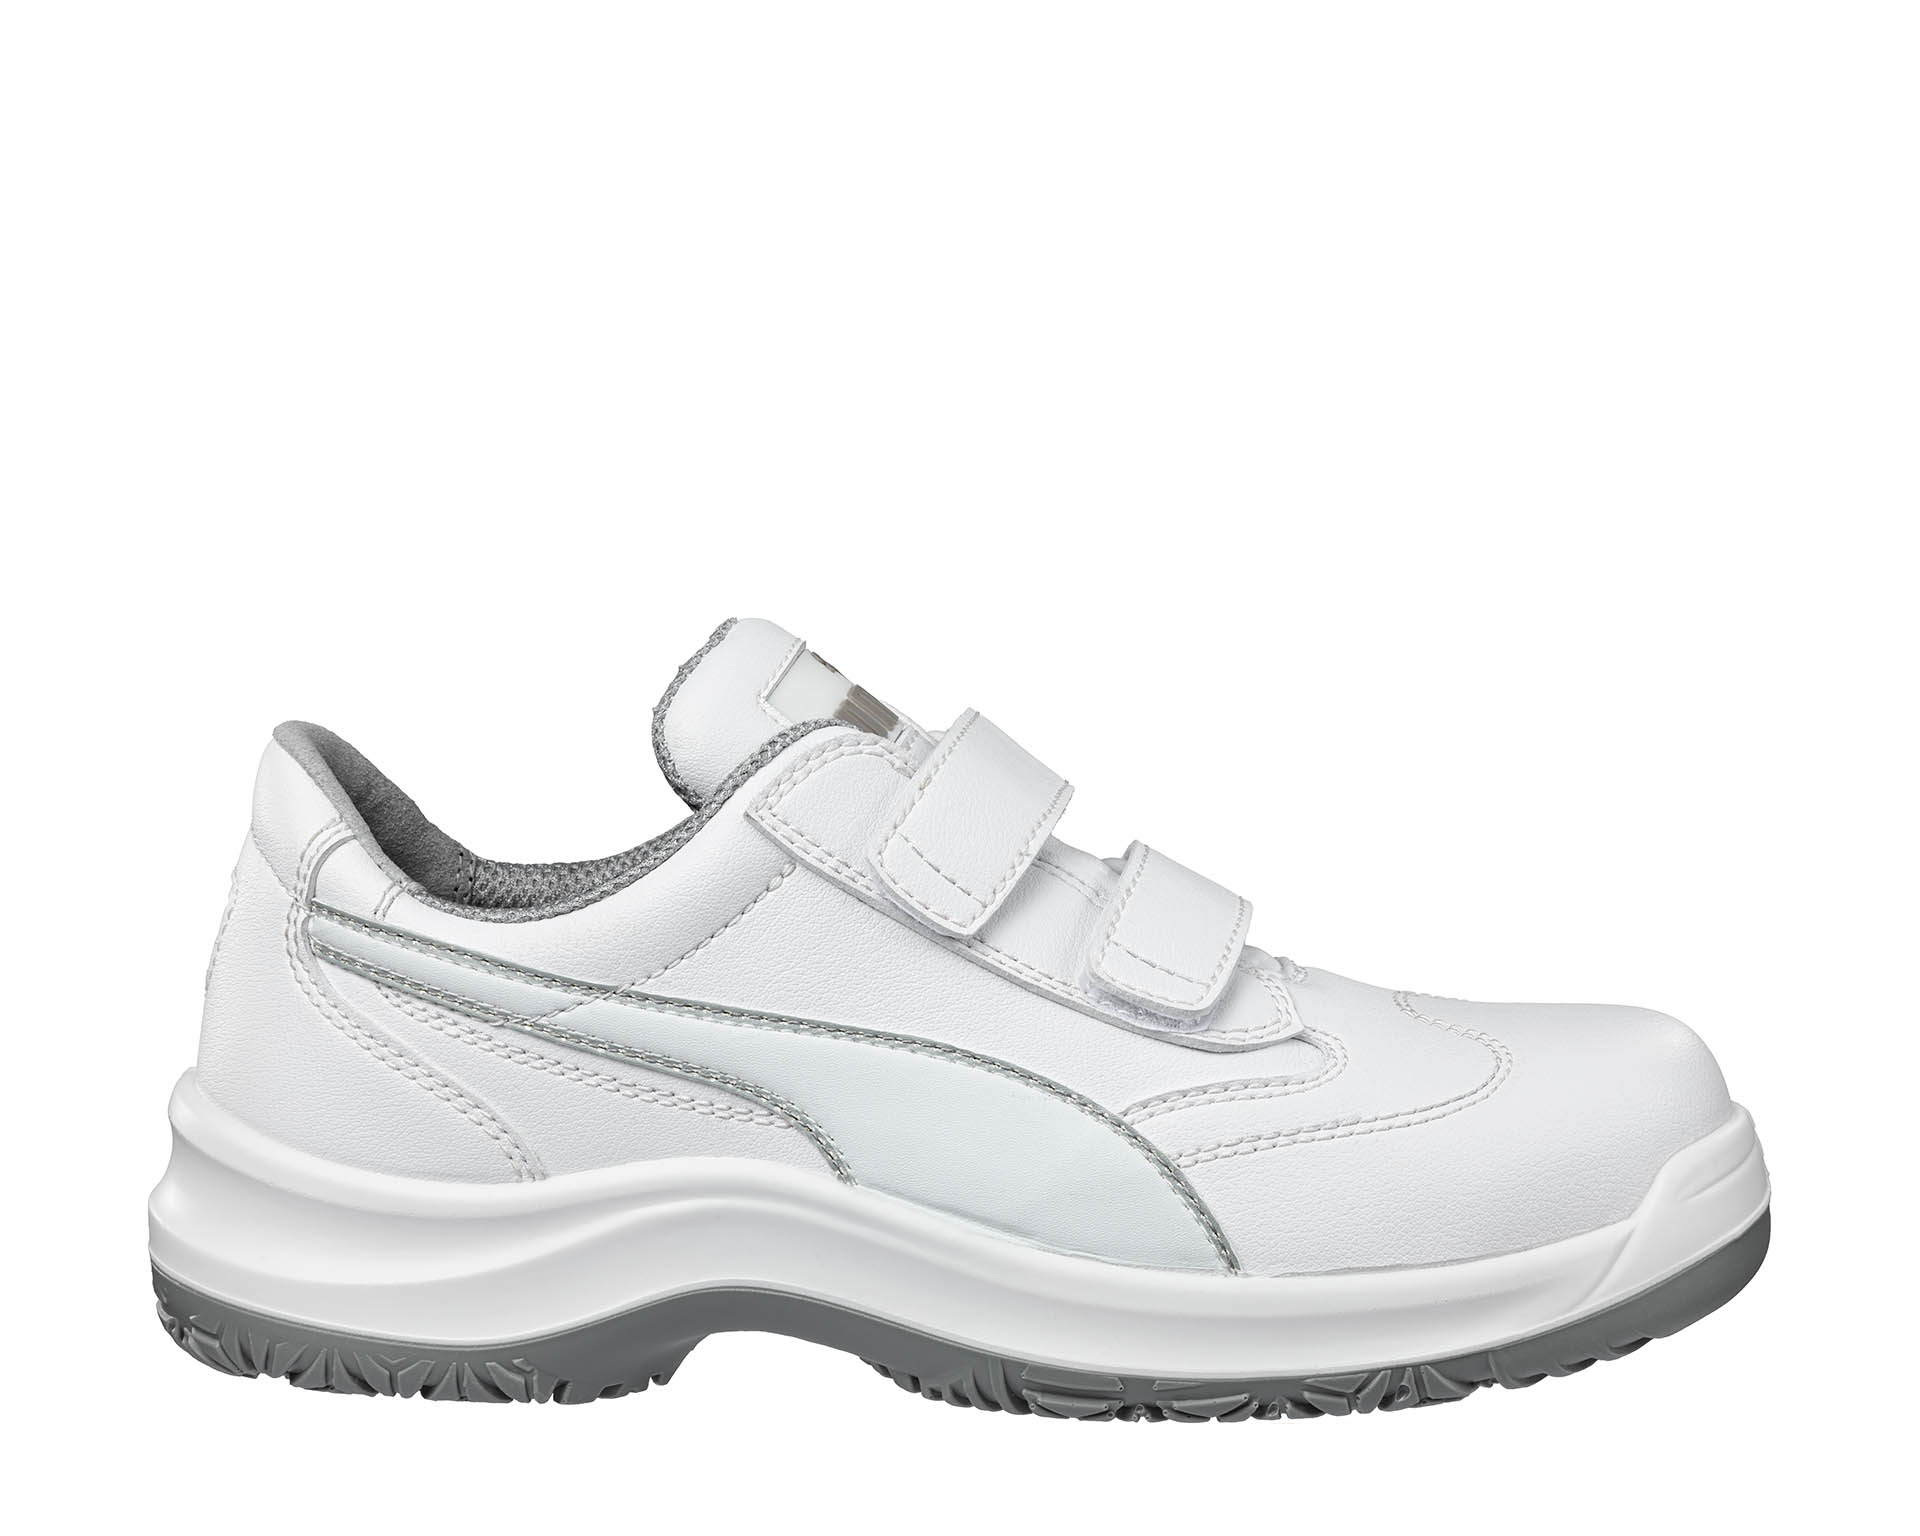 ABSOLUTE LOW shoes PUMA | SAFETY safety S2 English Puma Safety SRC